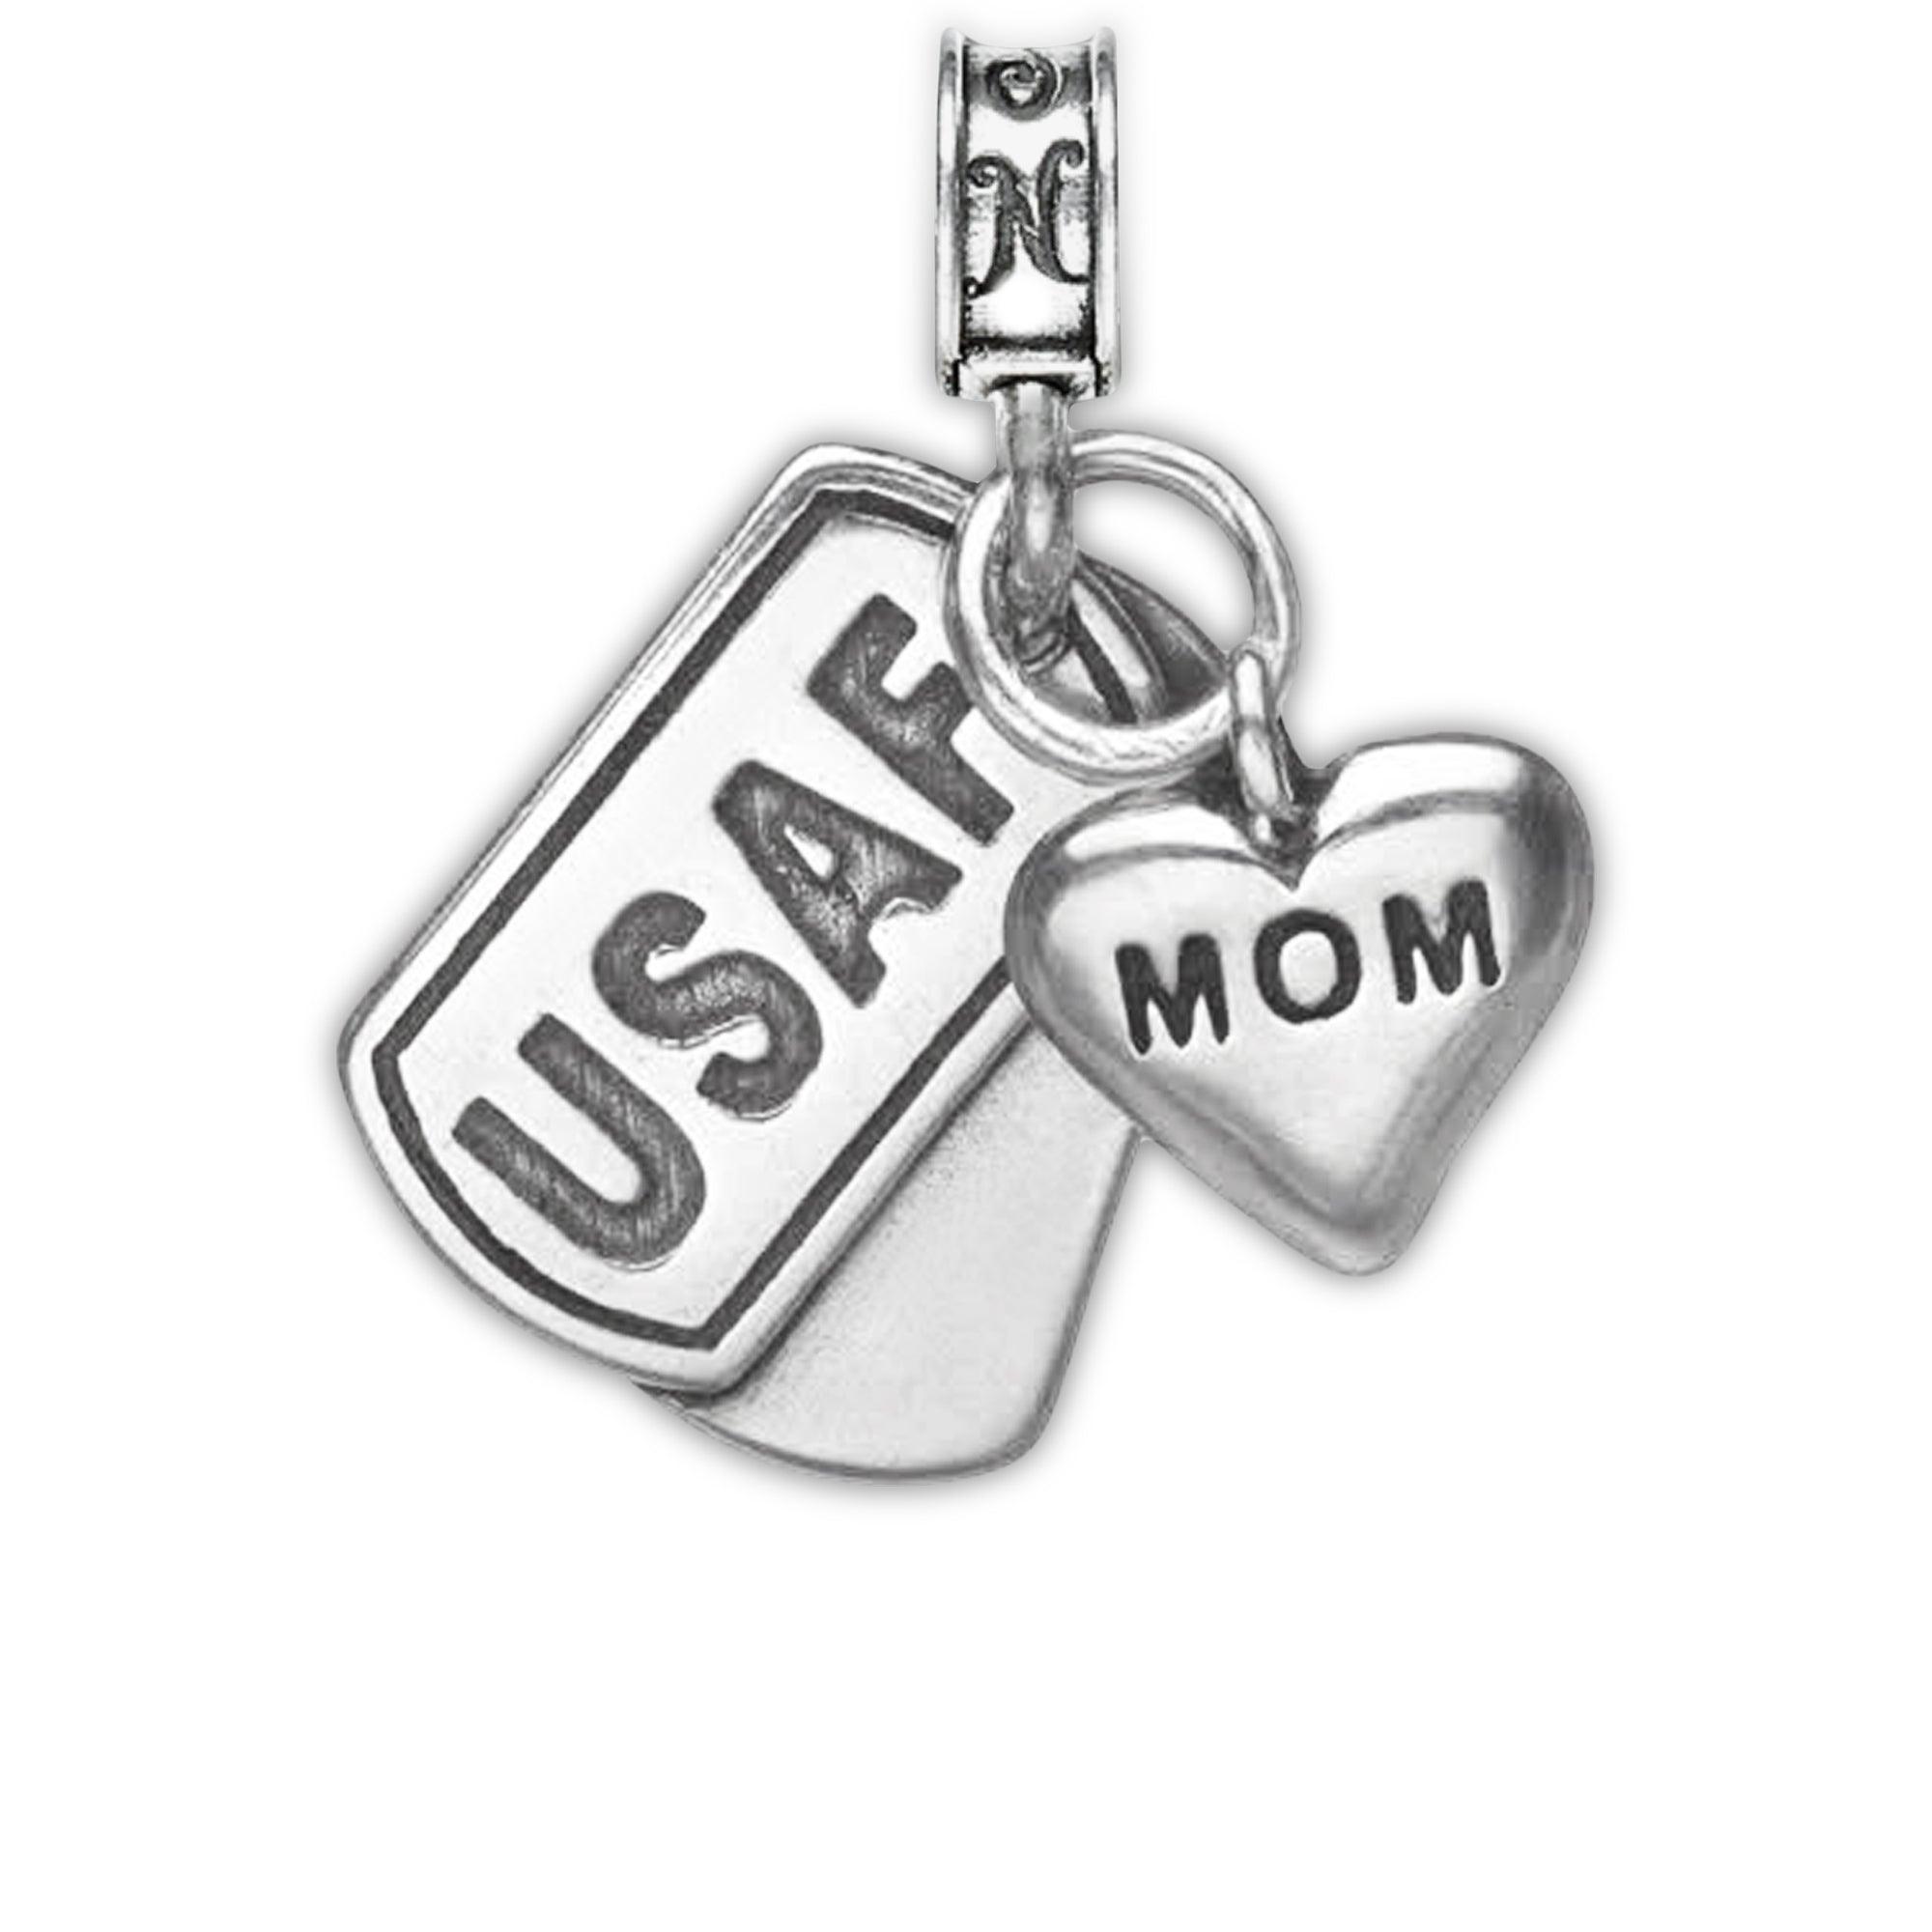 Military Jewelry, Military Charms, Military Gifts, USAF, United States Air Force, USAF Dog Tag, United States Air Force Dog Tag Air Force Proud Mom